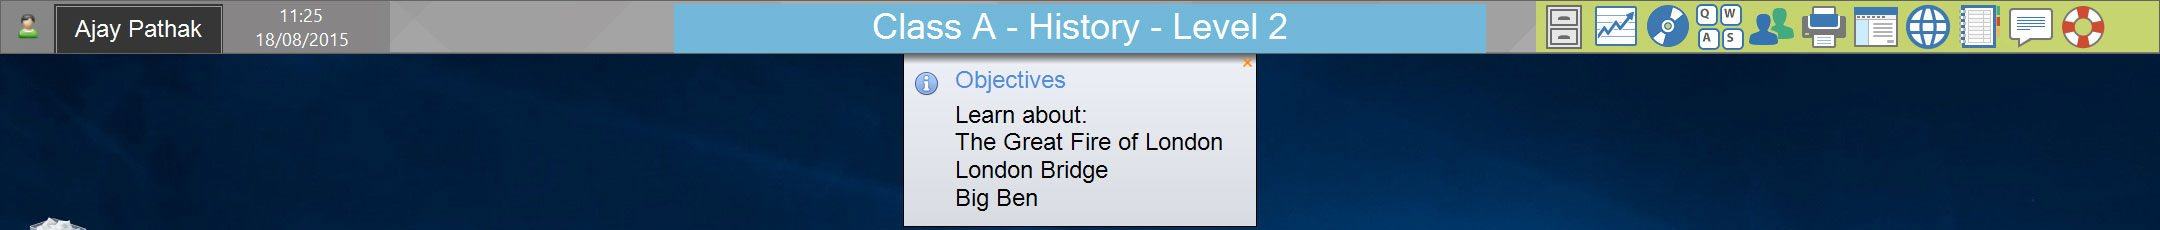 Student Information Bar: display lesson objectives